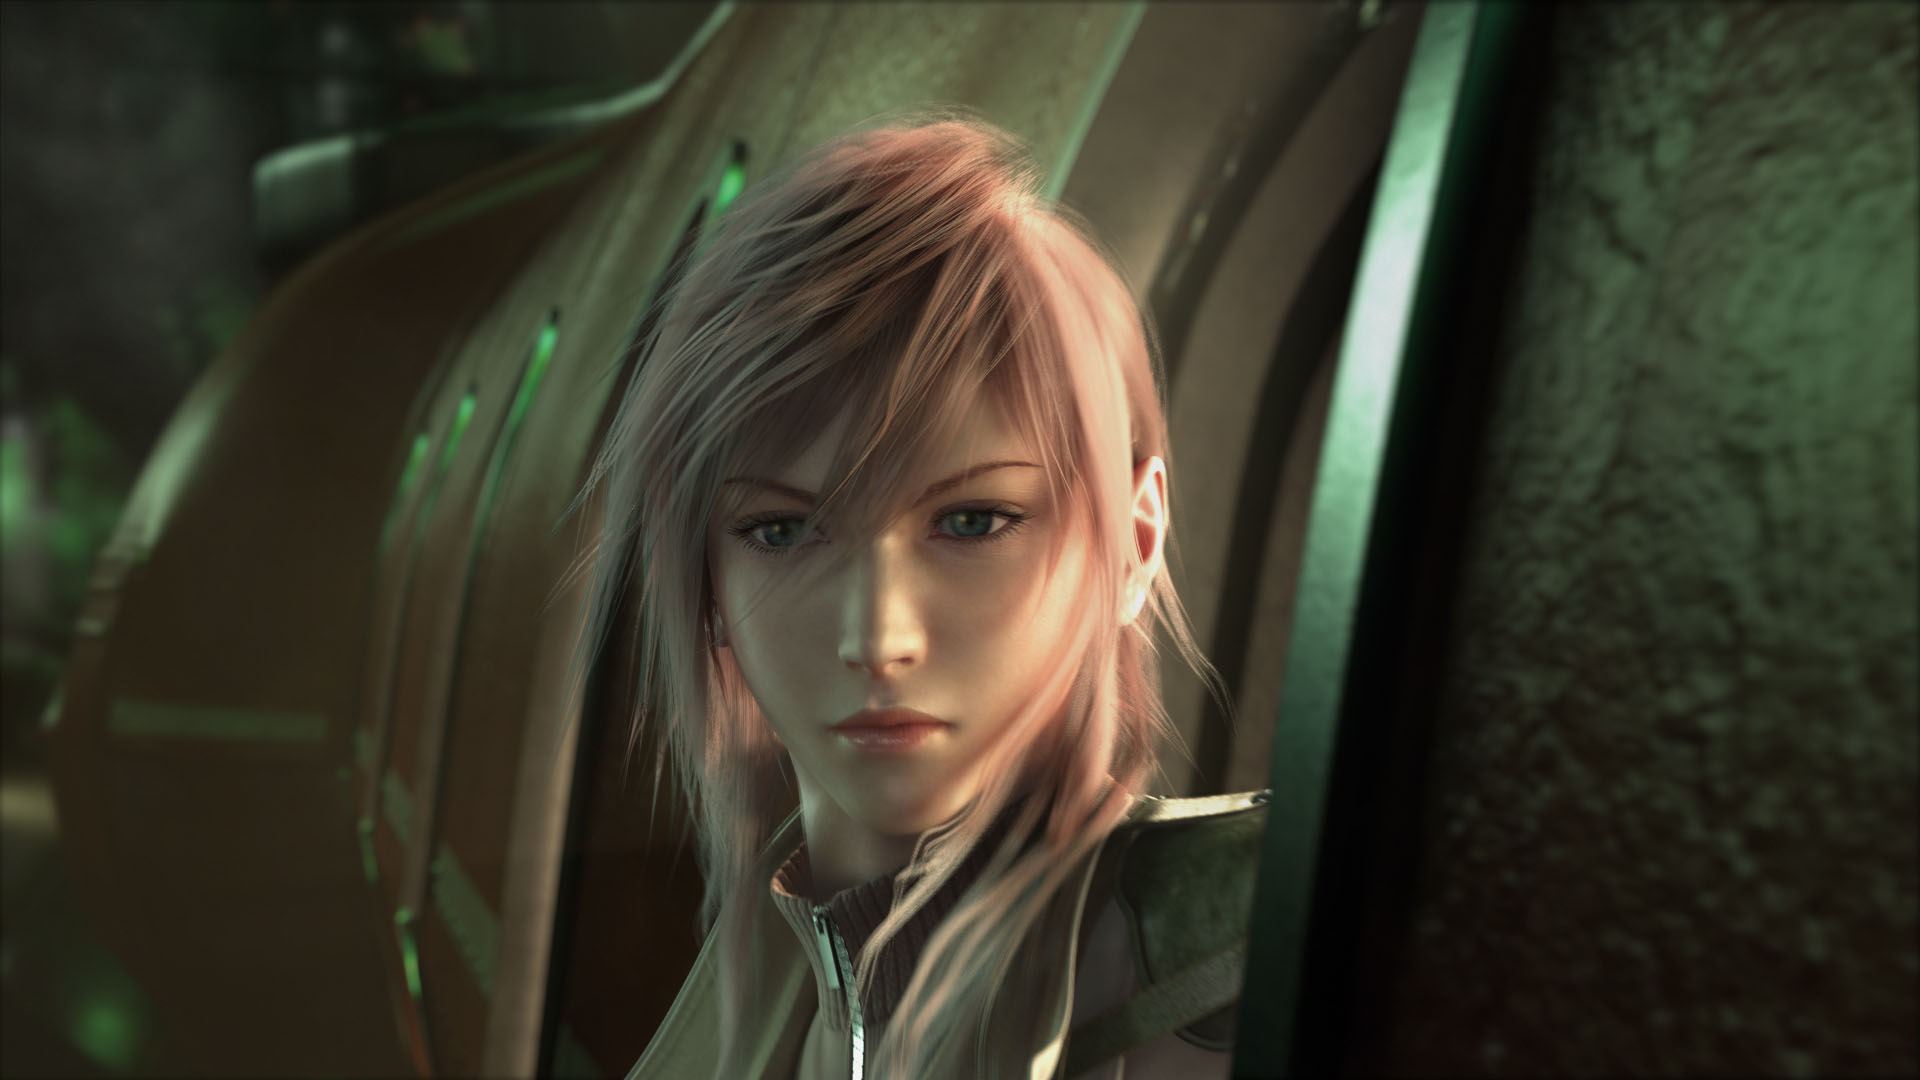 Lightning Looking Out The Train - Final Fantasy 13 Wallpaper